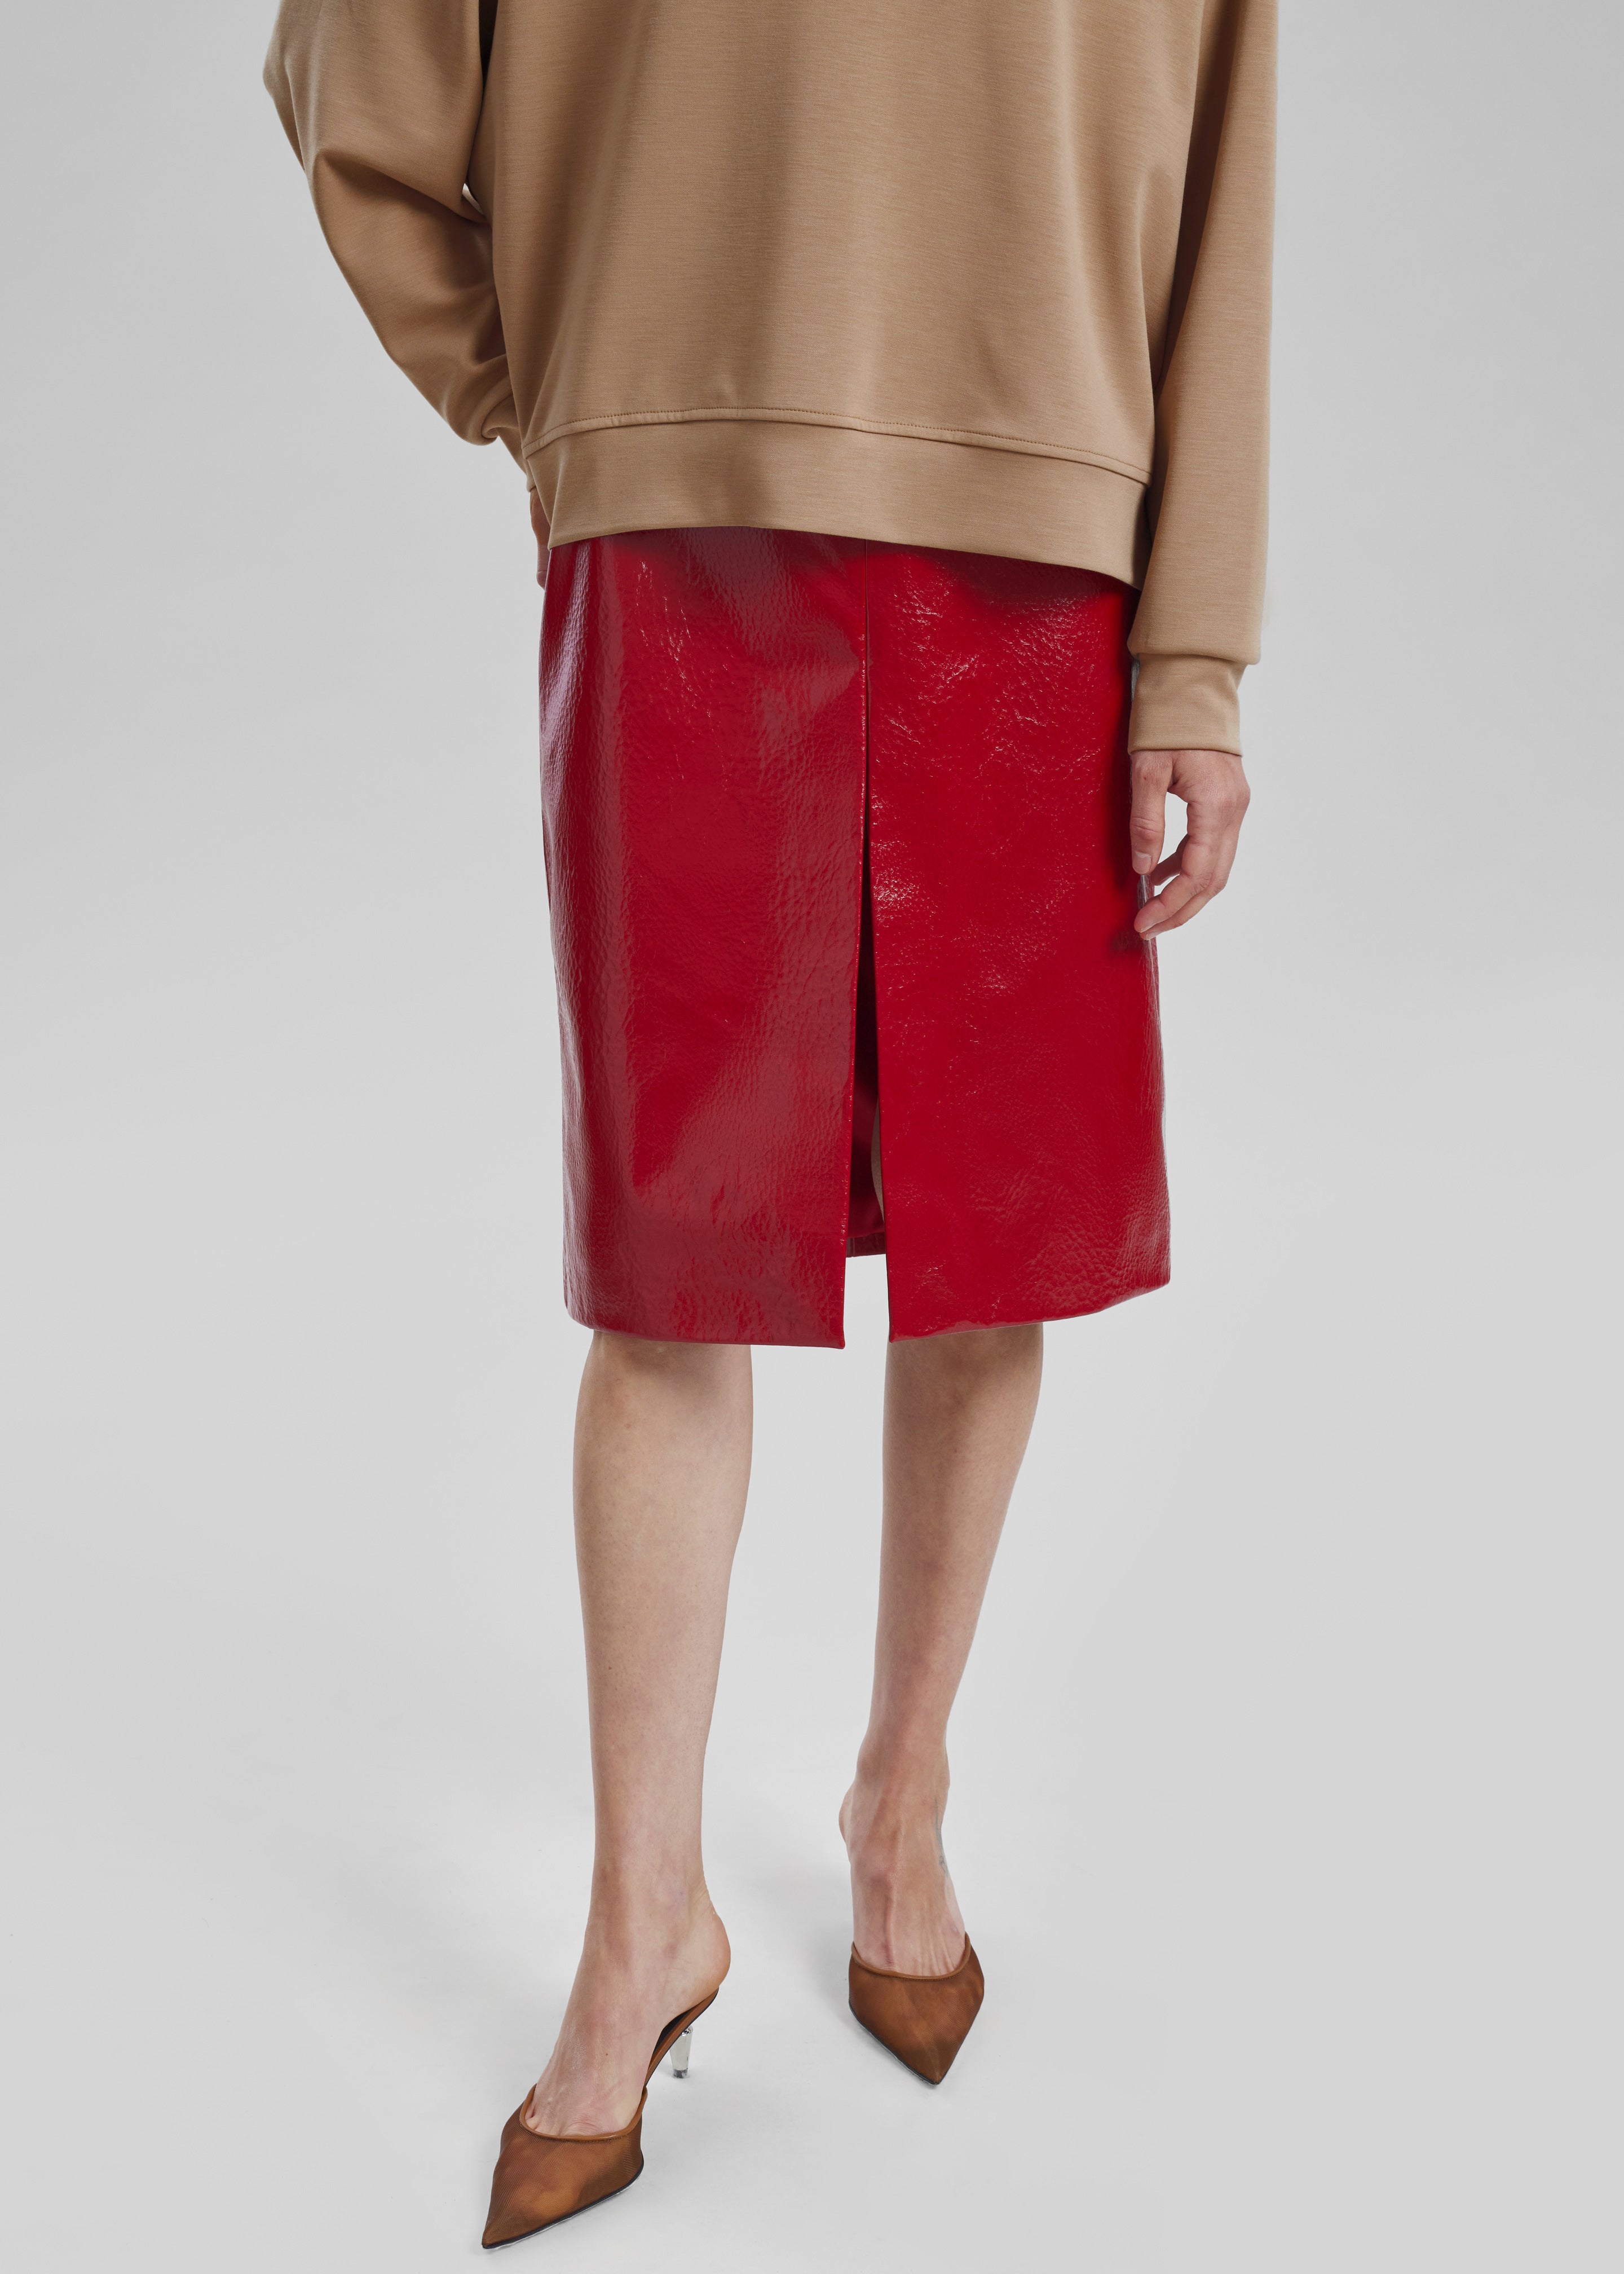 Britt Crackled Faux Leather Midi Skirt - Red - 4